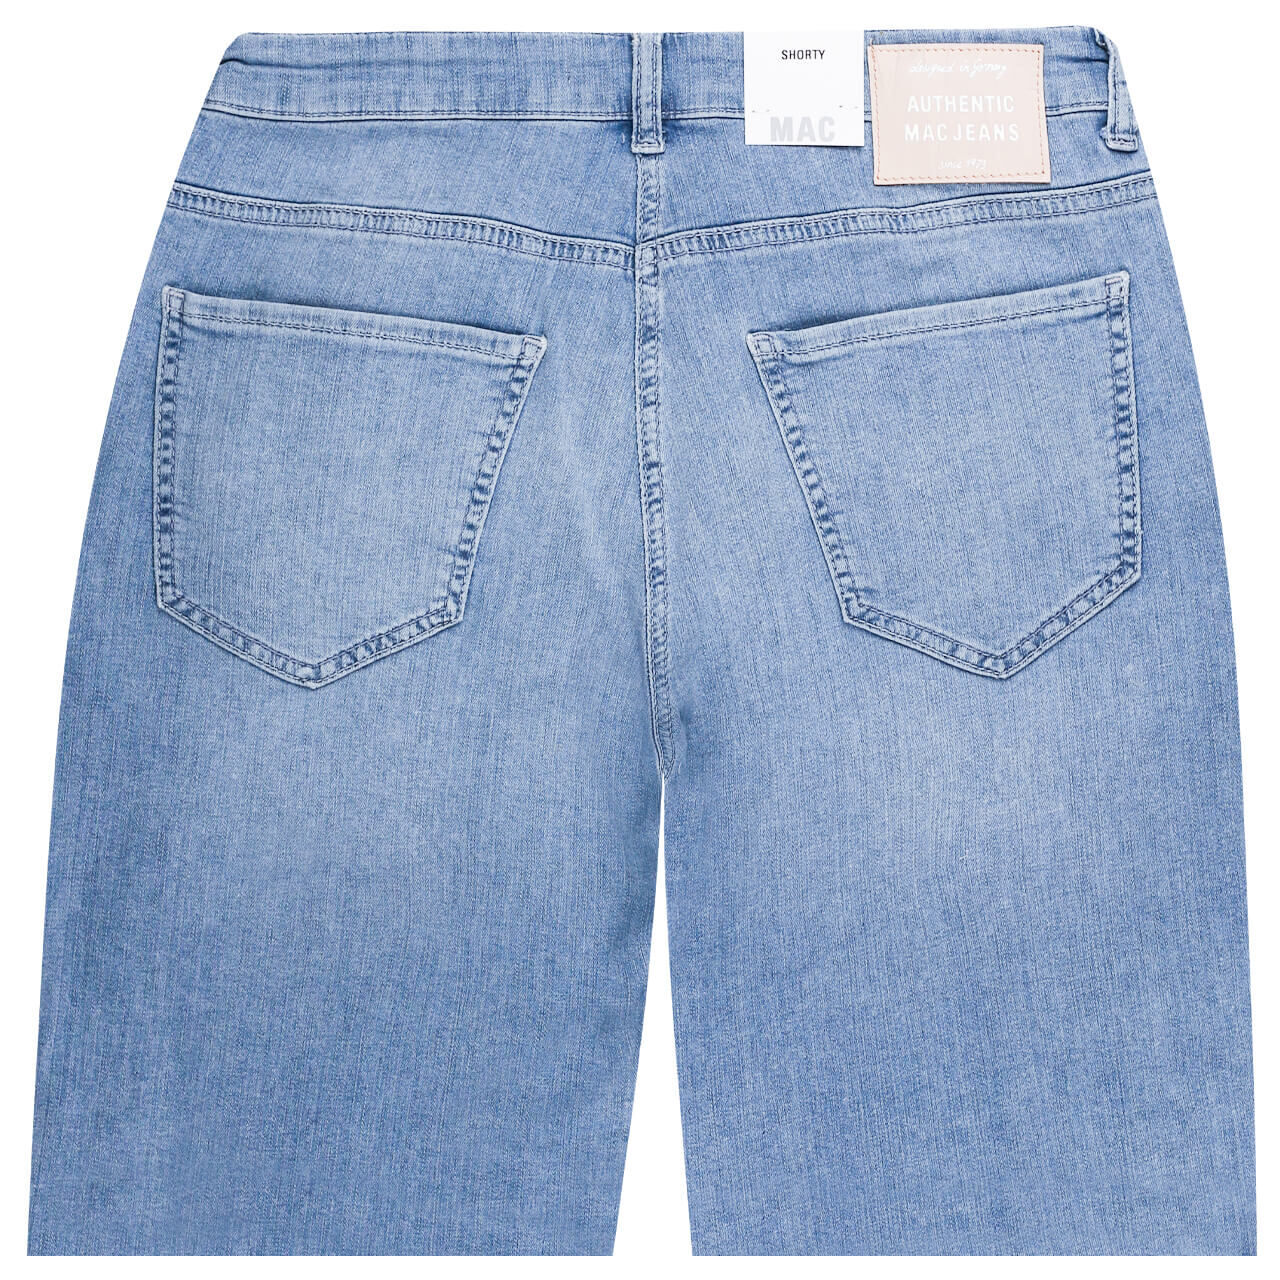 MAC Shorty Jeans mid blue wash